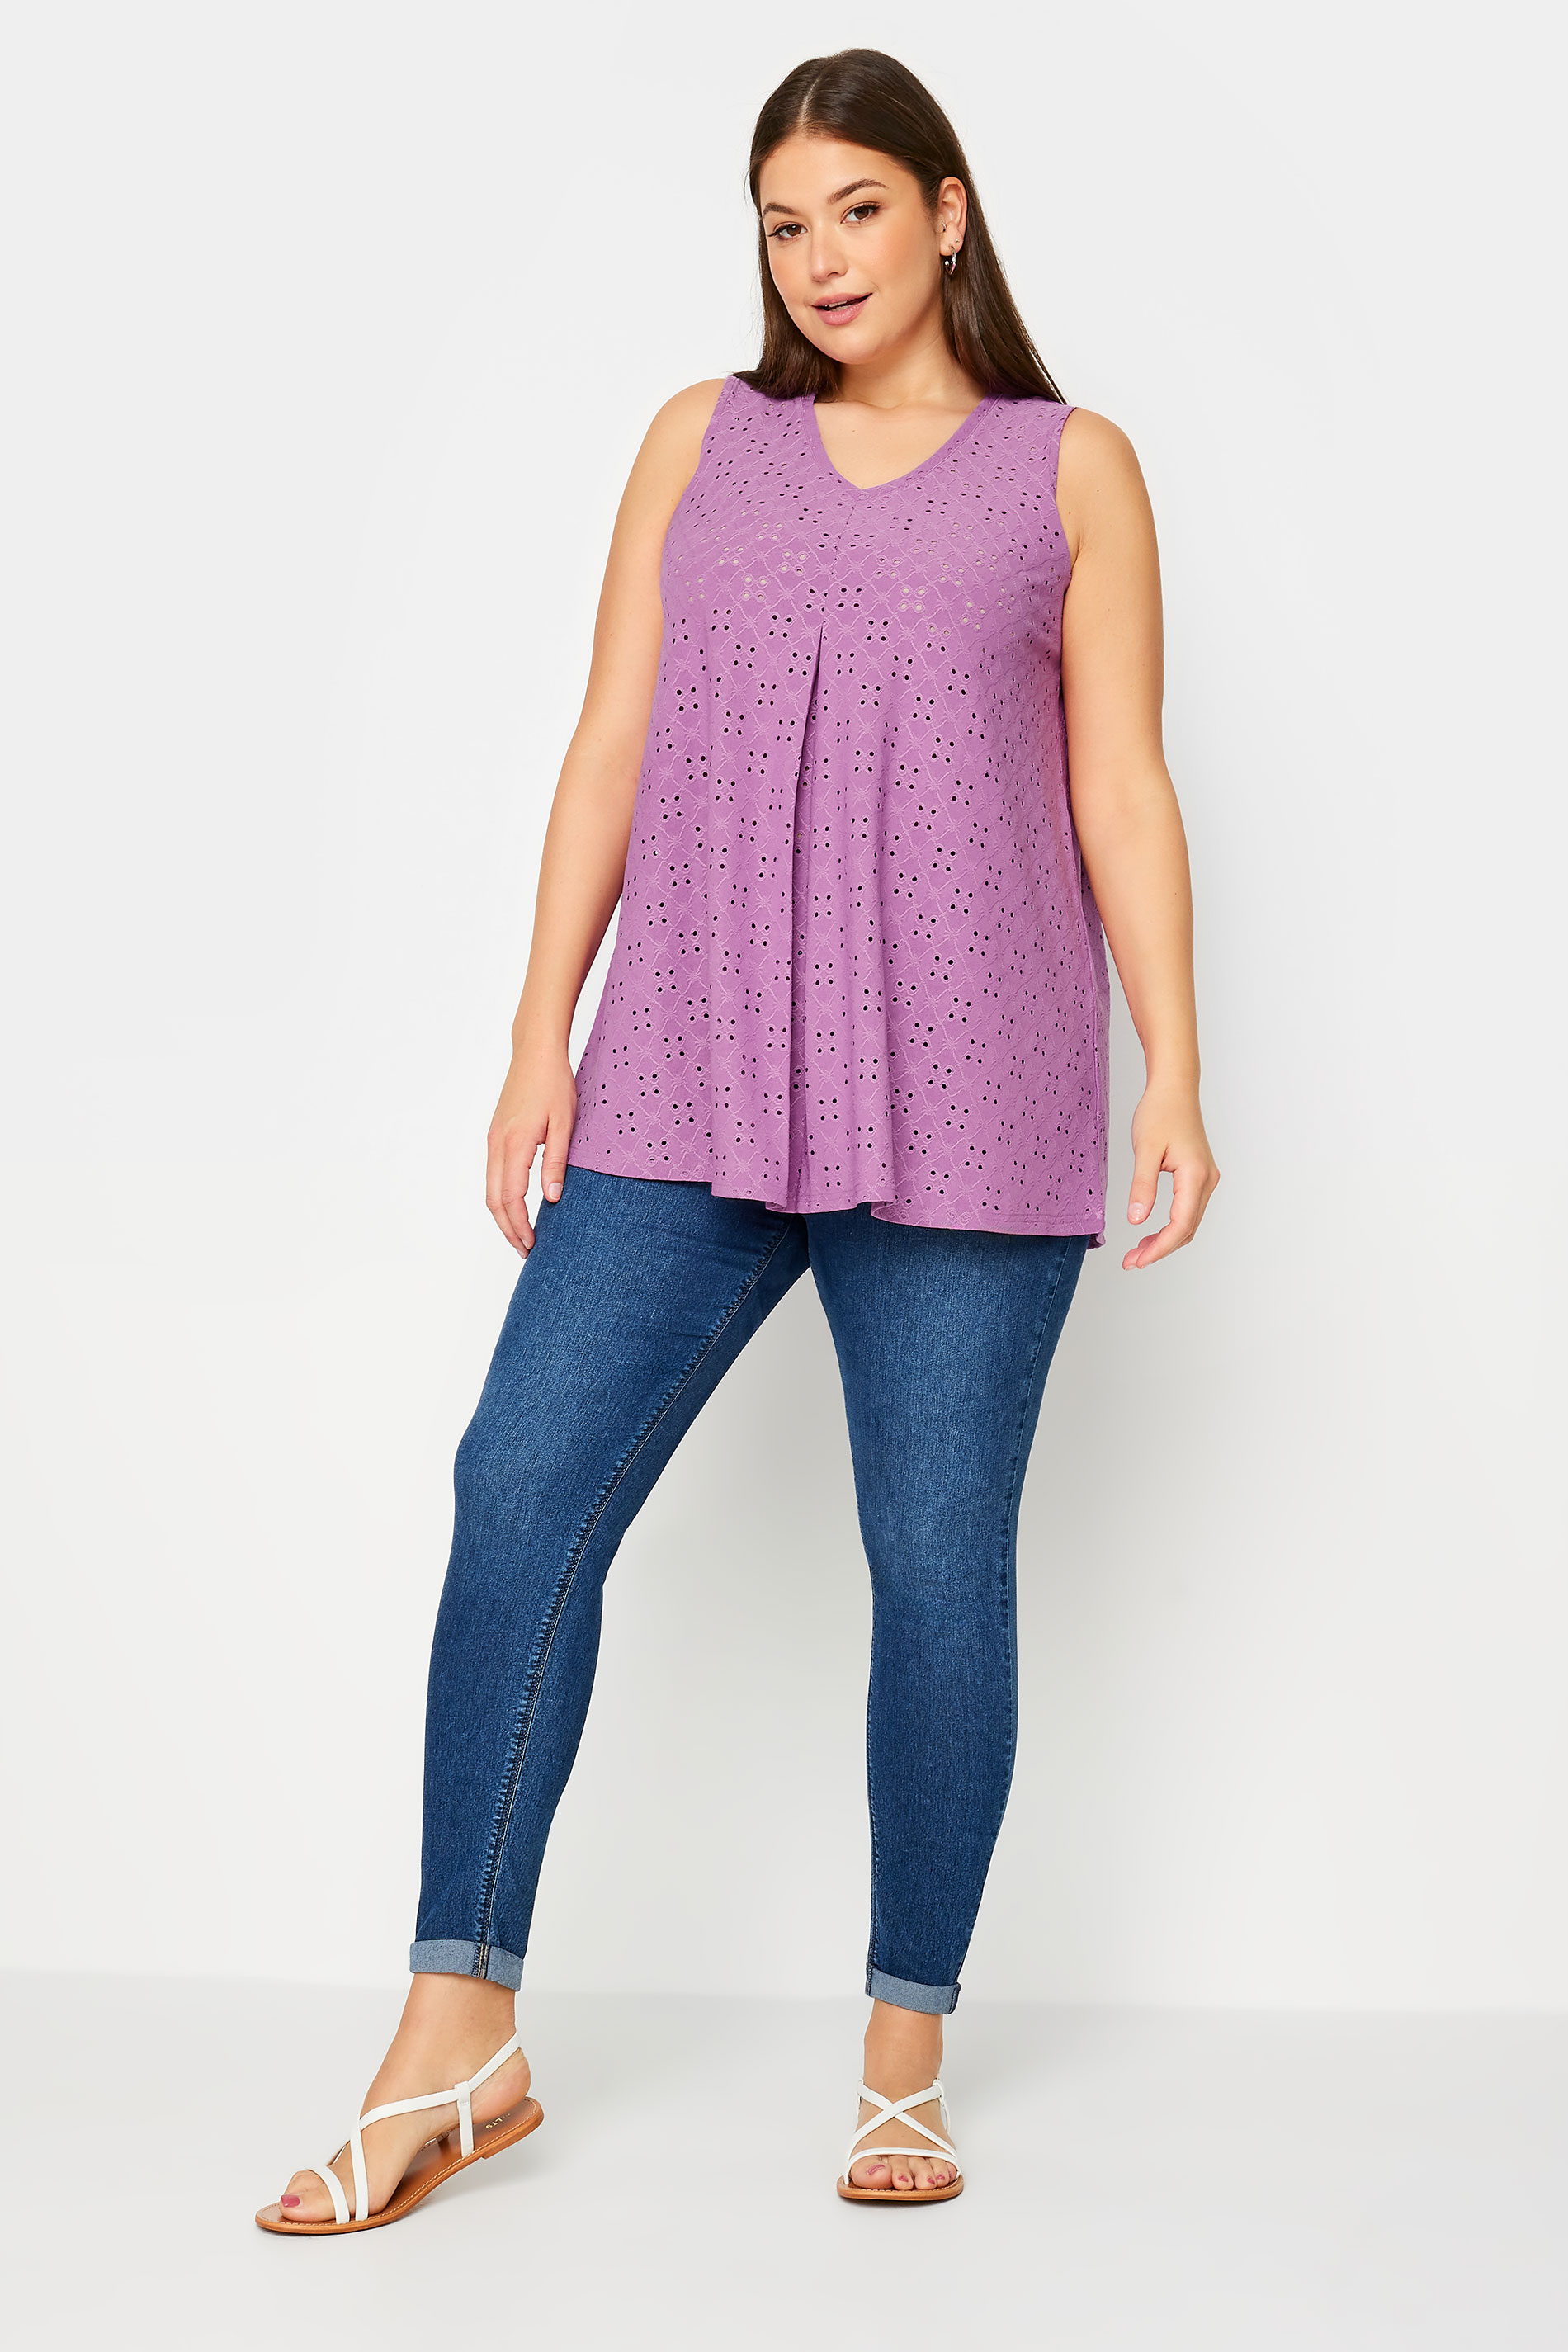 YOURS Plus Size Purple Broderie Anglaise Swing Vest Top | Yours Clothing 3